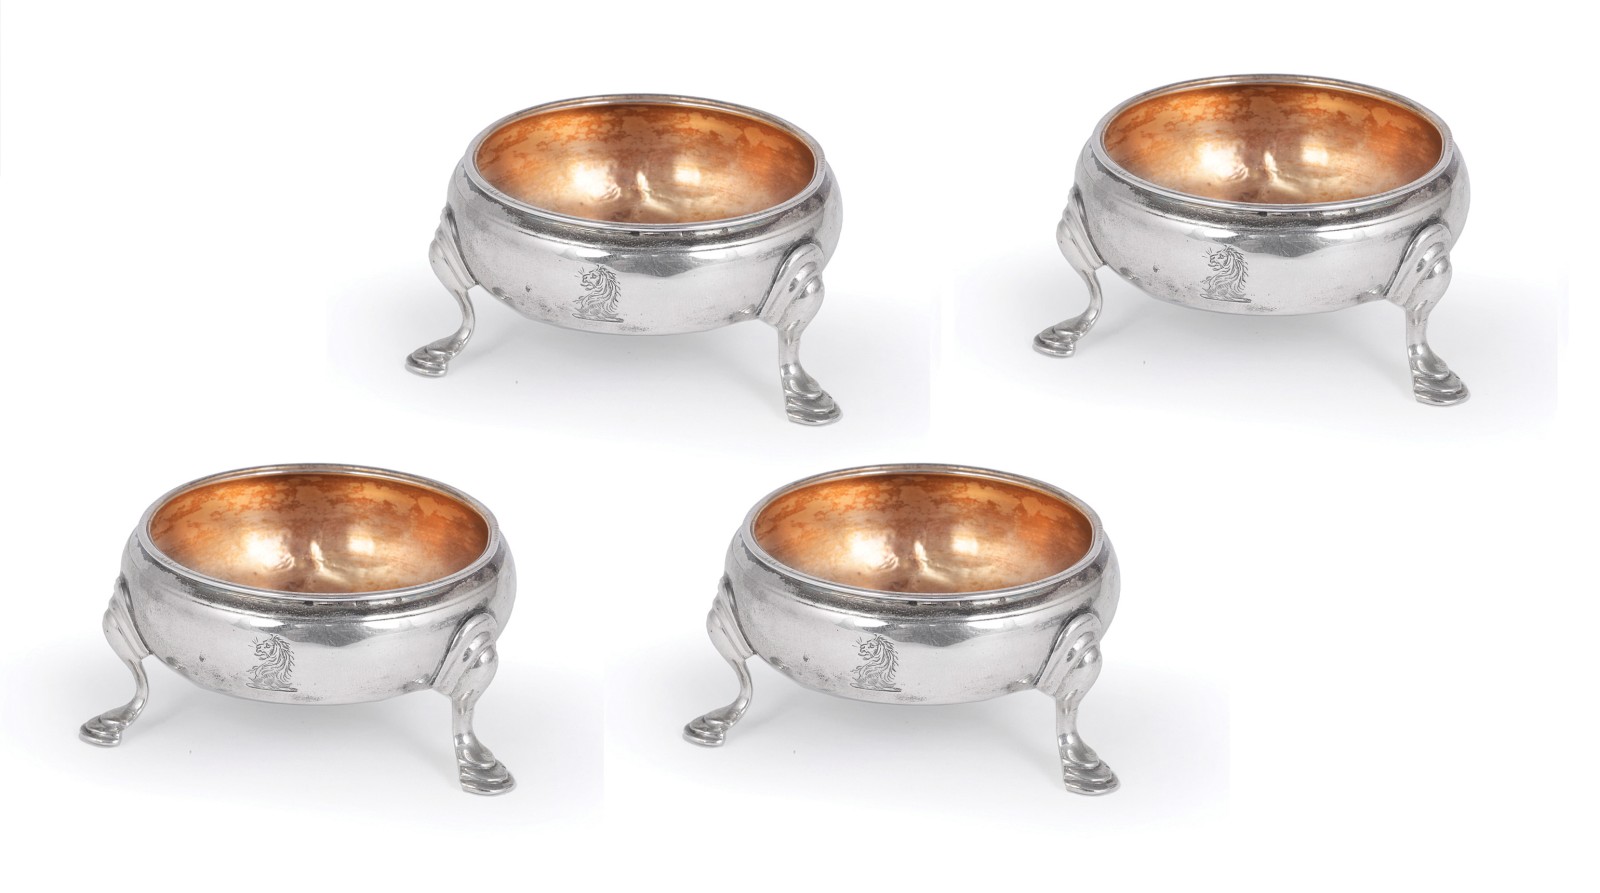 FOUR GEORGE III SILVER SALT CELLARS, MARKS RUBBED, TWO THOMAS SHEPHERD, ALL LONDON, 1770-67 AND